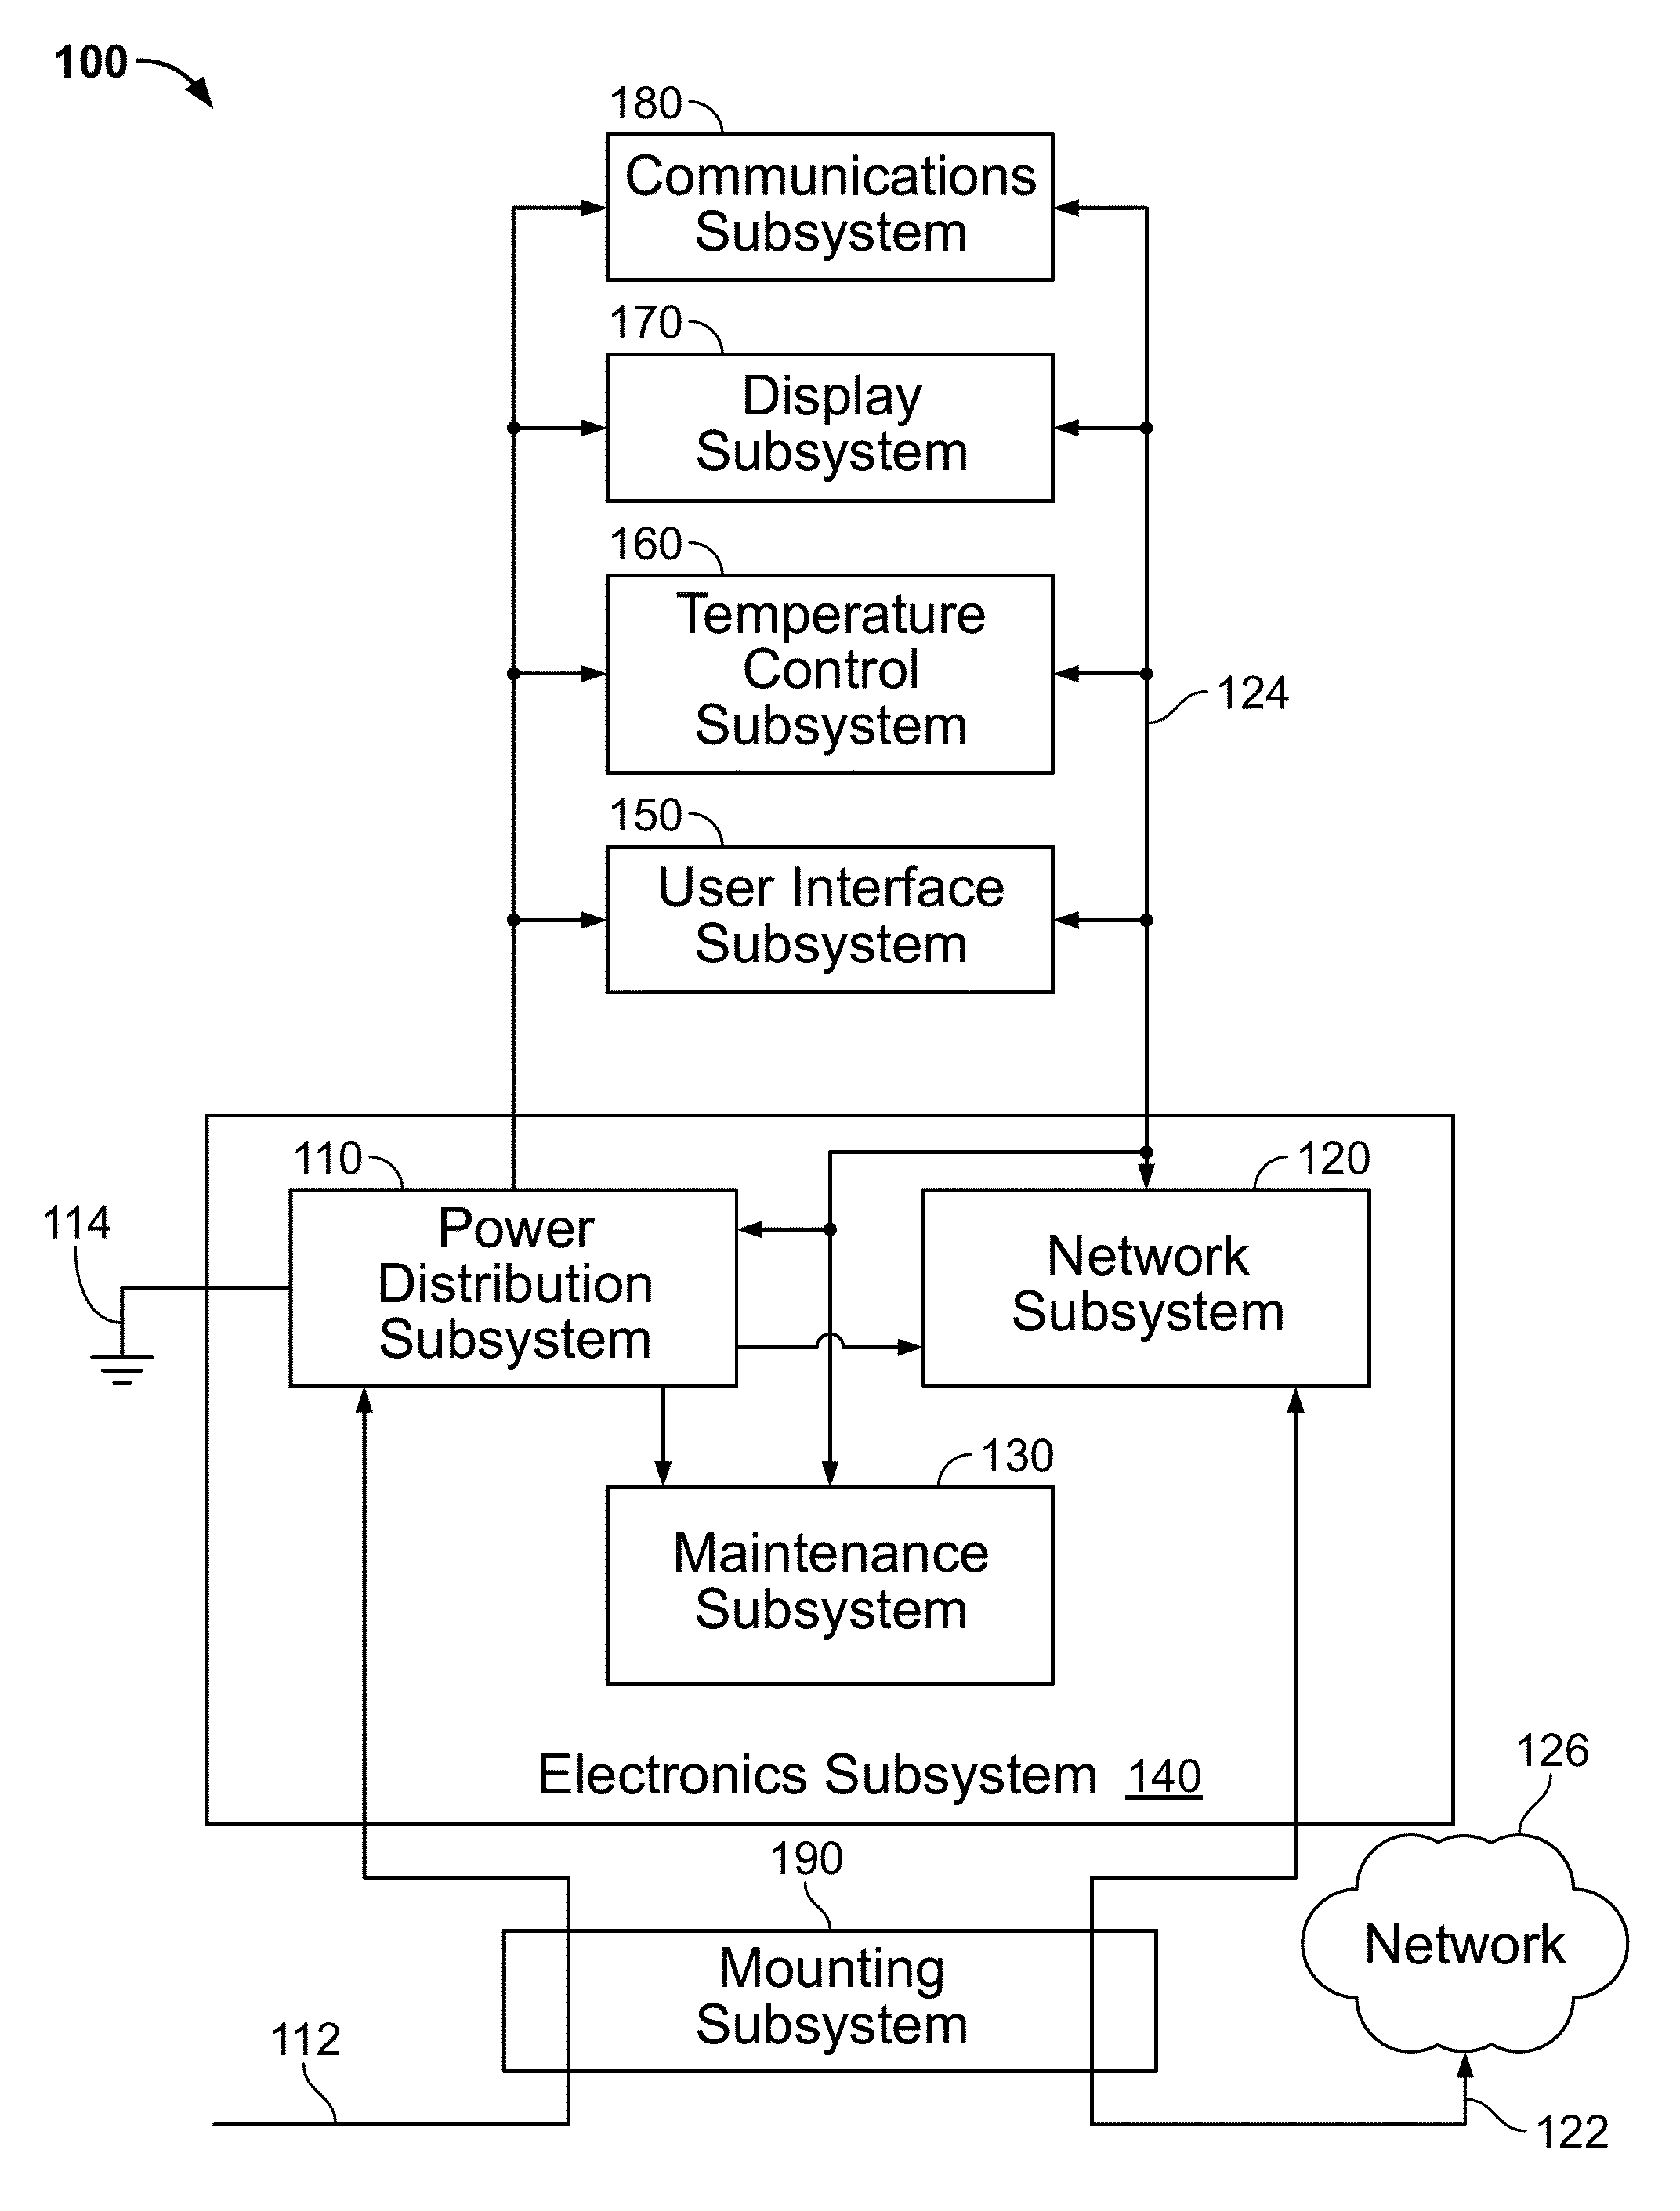 Techniques and apparatus for controlling access to components of a personal communication structure (PCS)